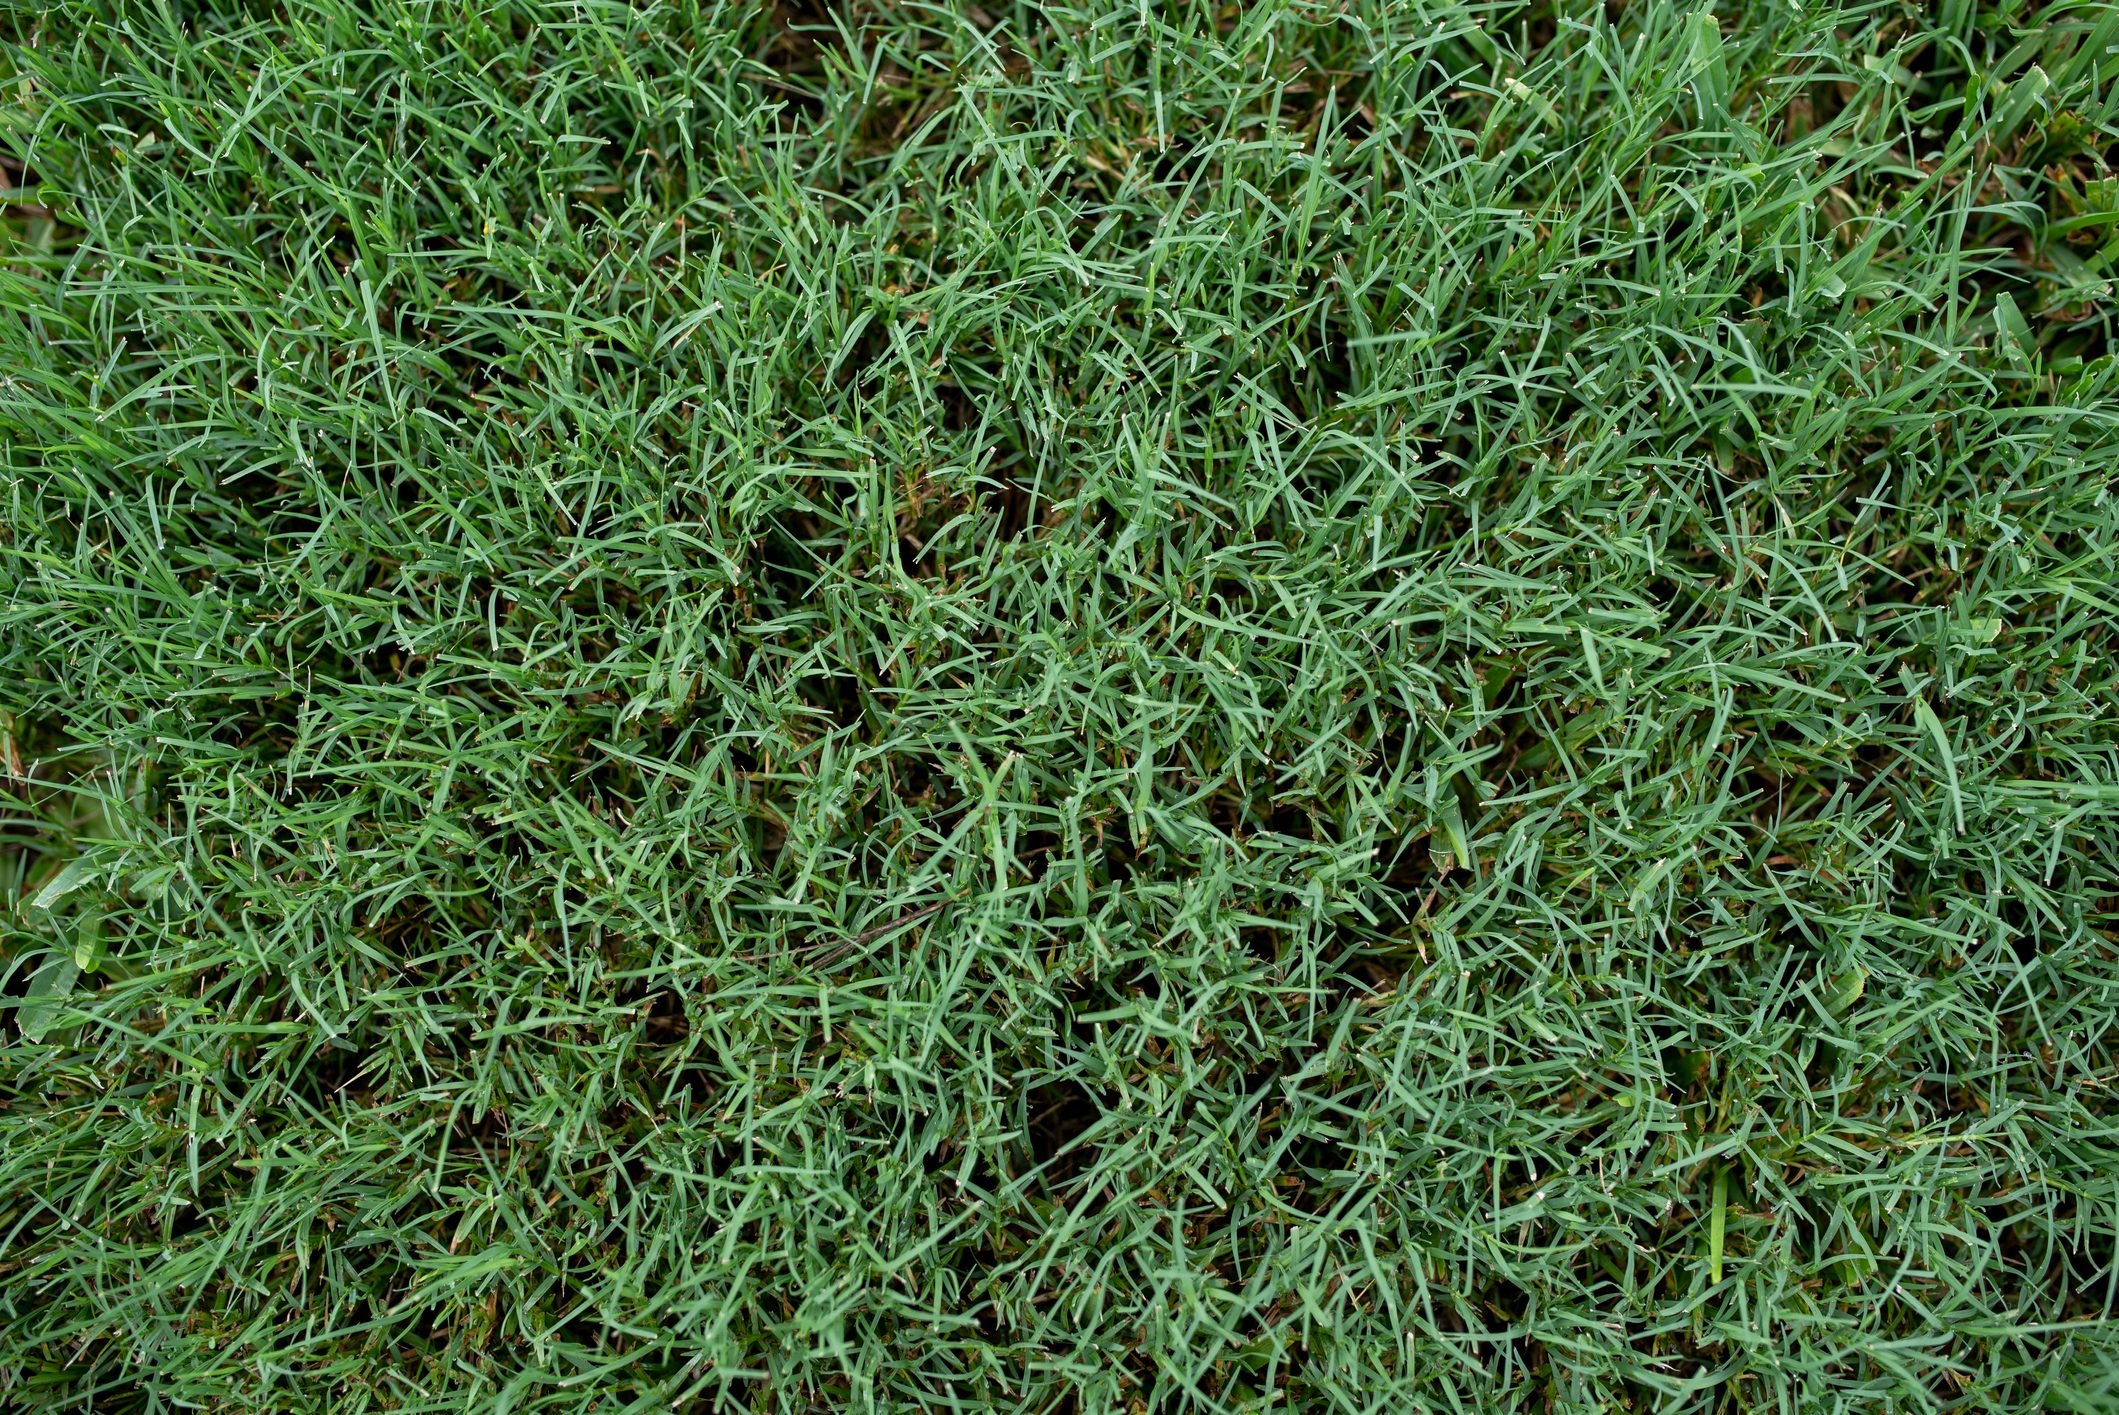 How to Get Rid of Bermuda Grass in Your Garden